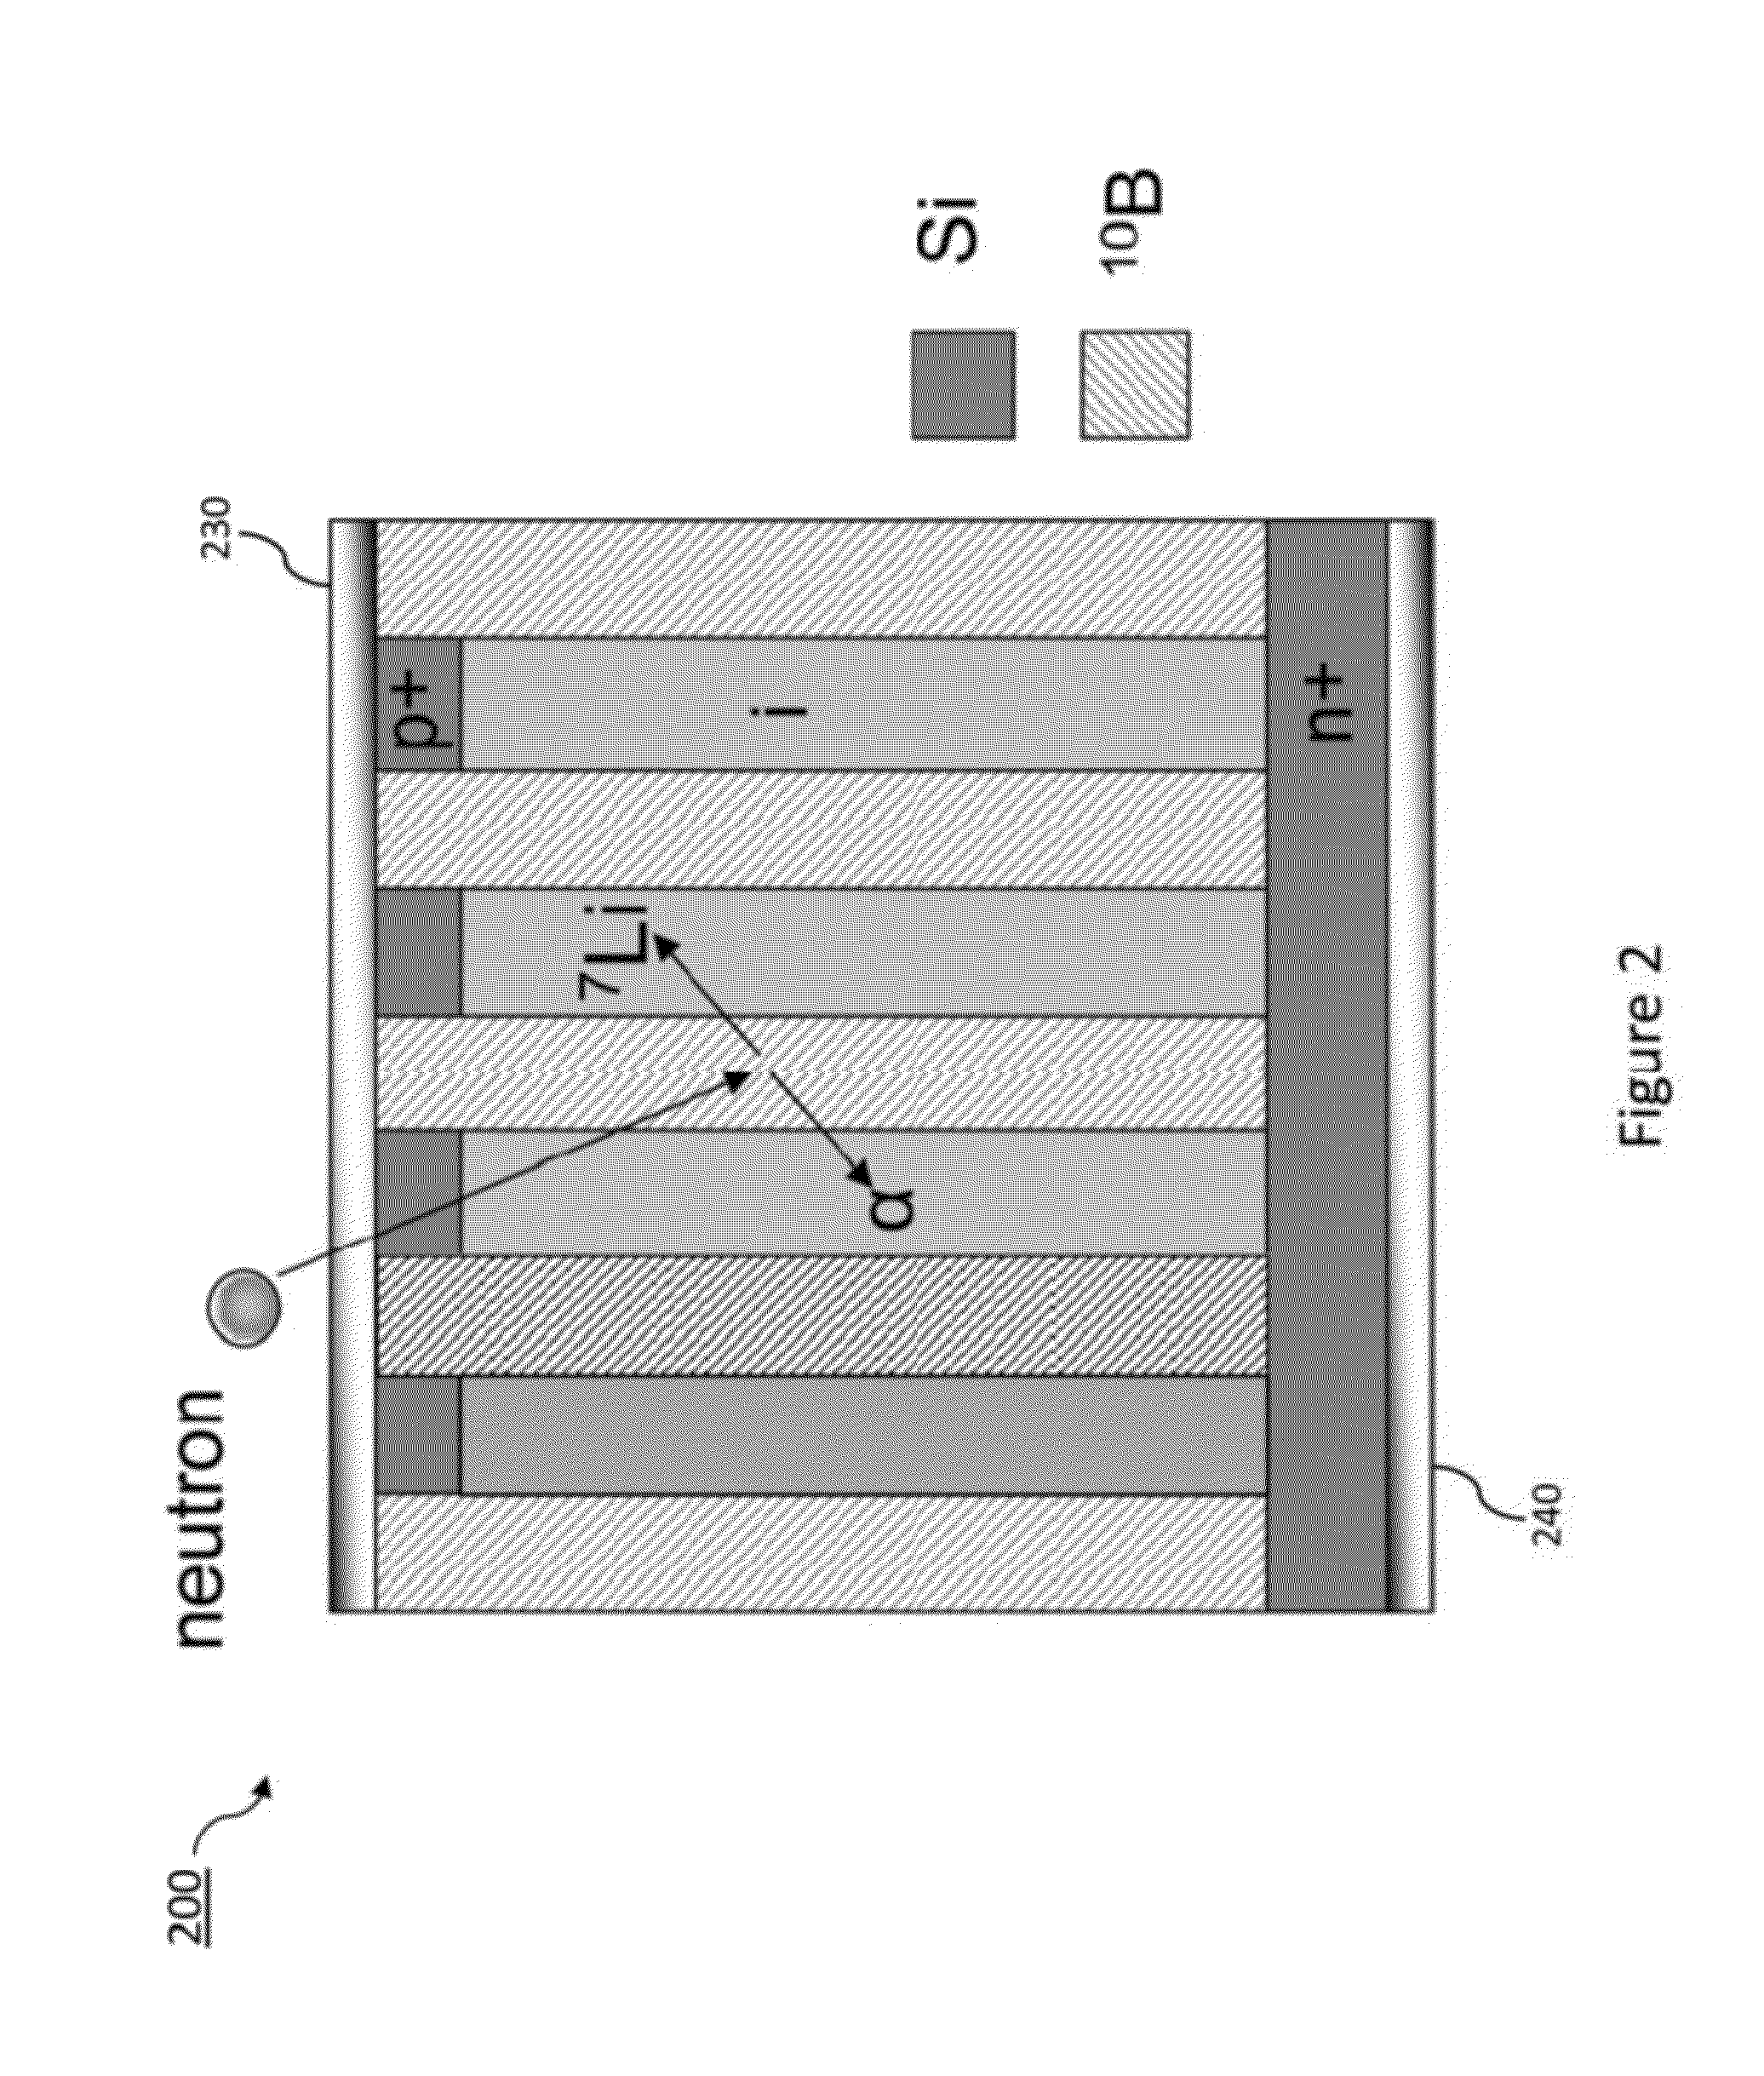 Method for manufacturing solid-state thermal neutron detectors with simultaneous high thermal neutron detection efficiency (&gt;50%) and neutron to gamma discrimination (&gt;1.0e4)